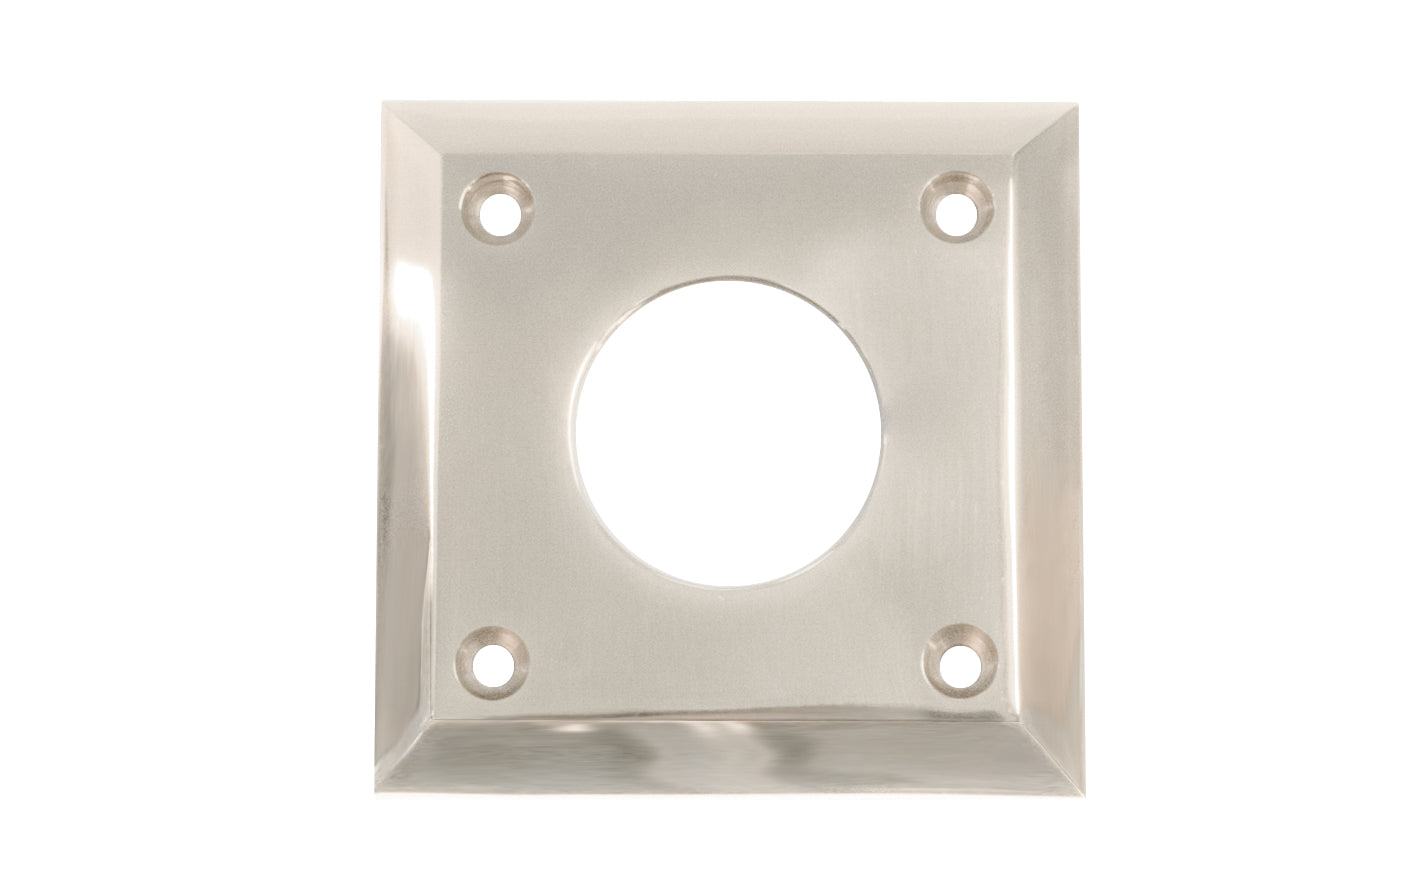 Solid brass square shape cylinder collar designed for exterior doors that take mortise lock with keyed cylinder. Includes fasteners (keyway cylinder sold separately). Polished Nickel finish